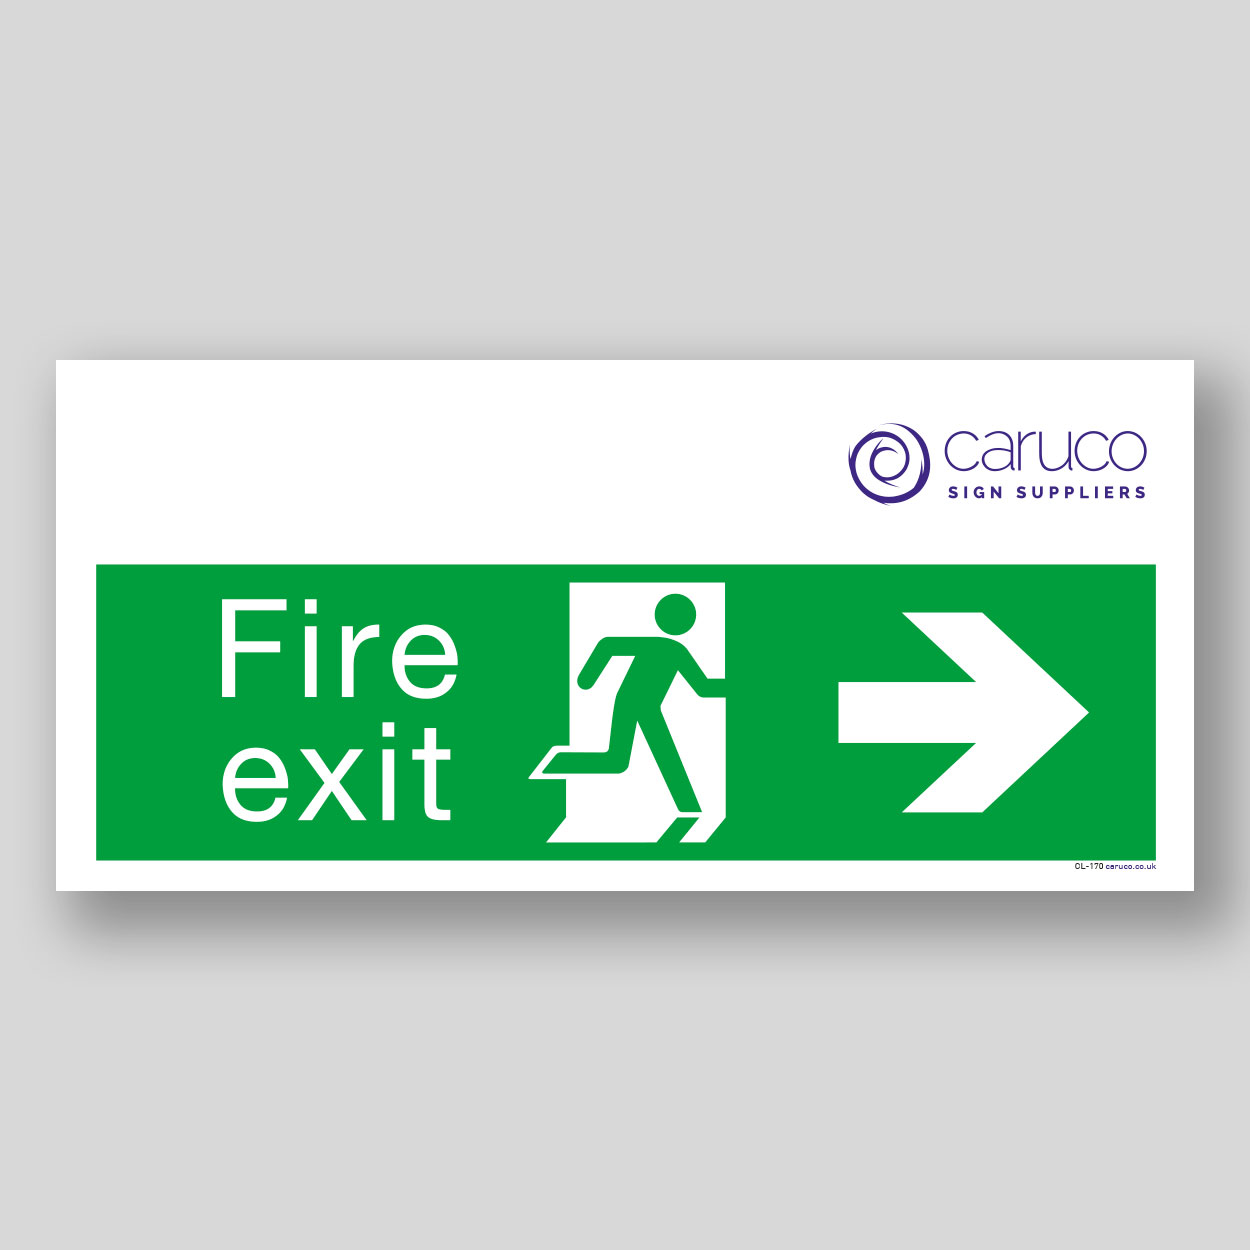 CL-170 Fire exit - with right arrow